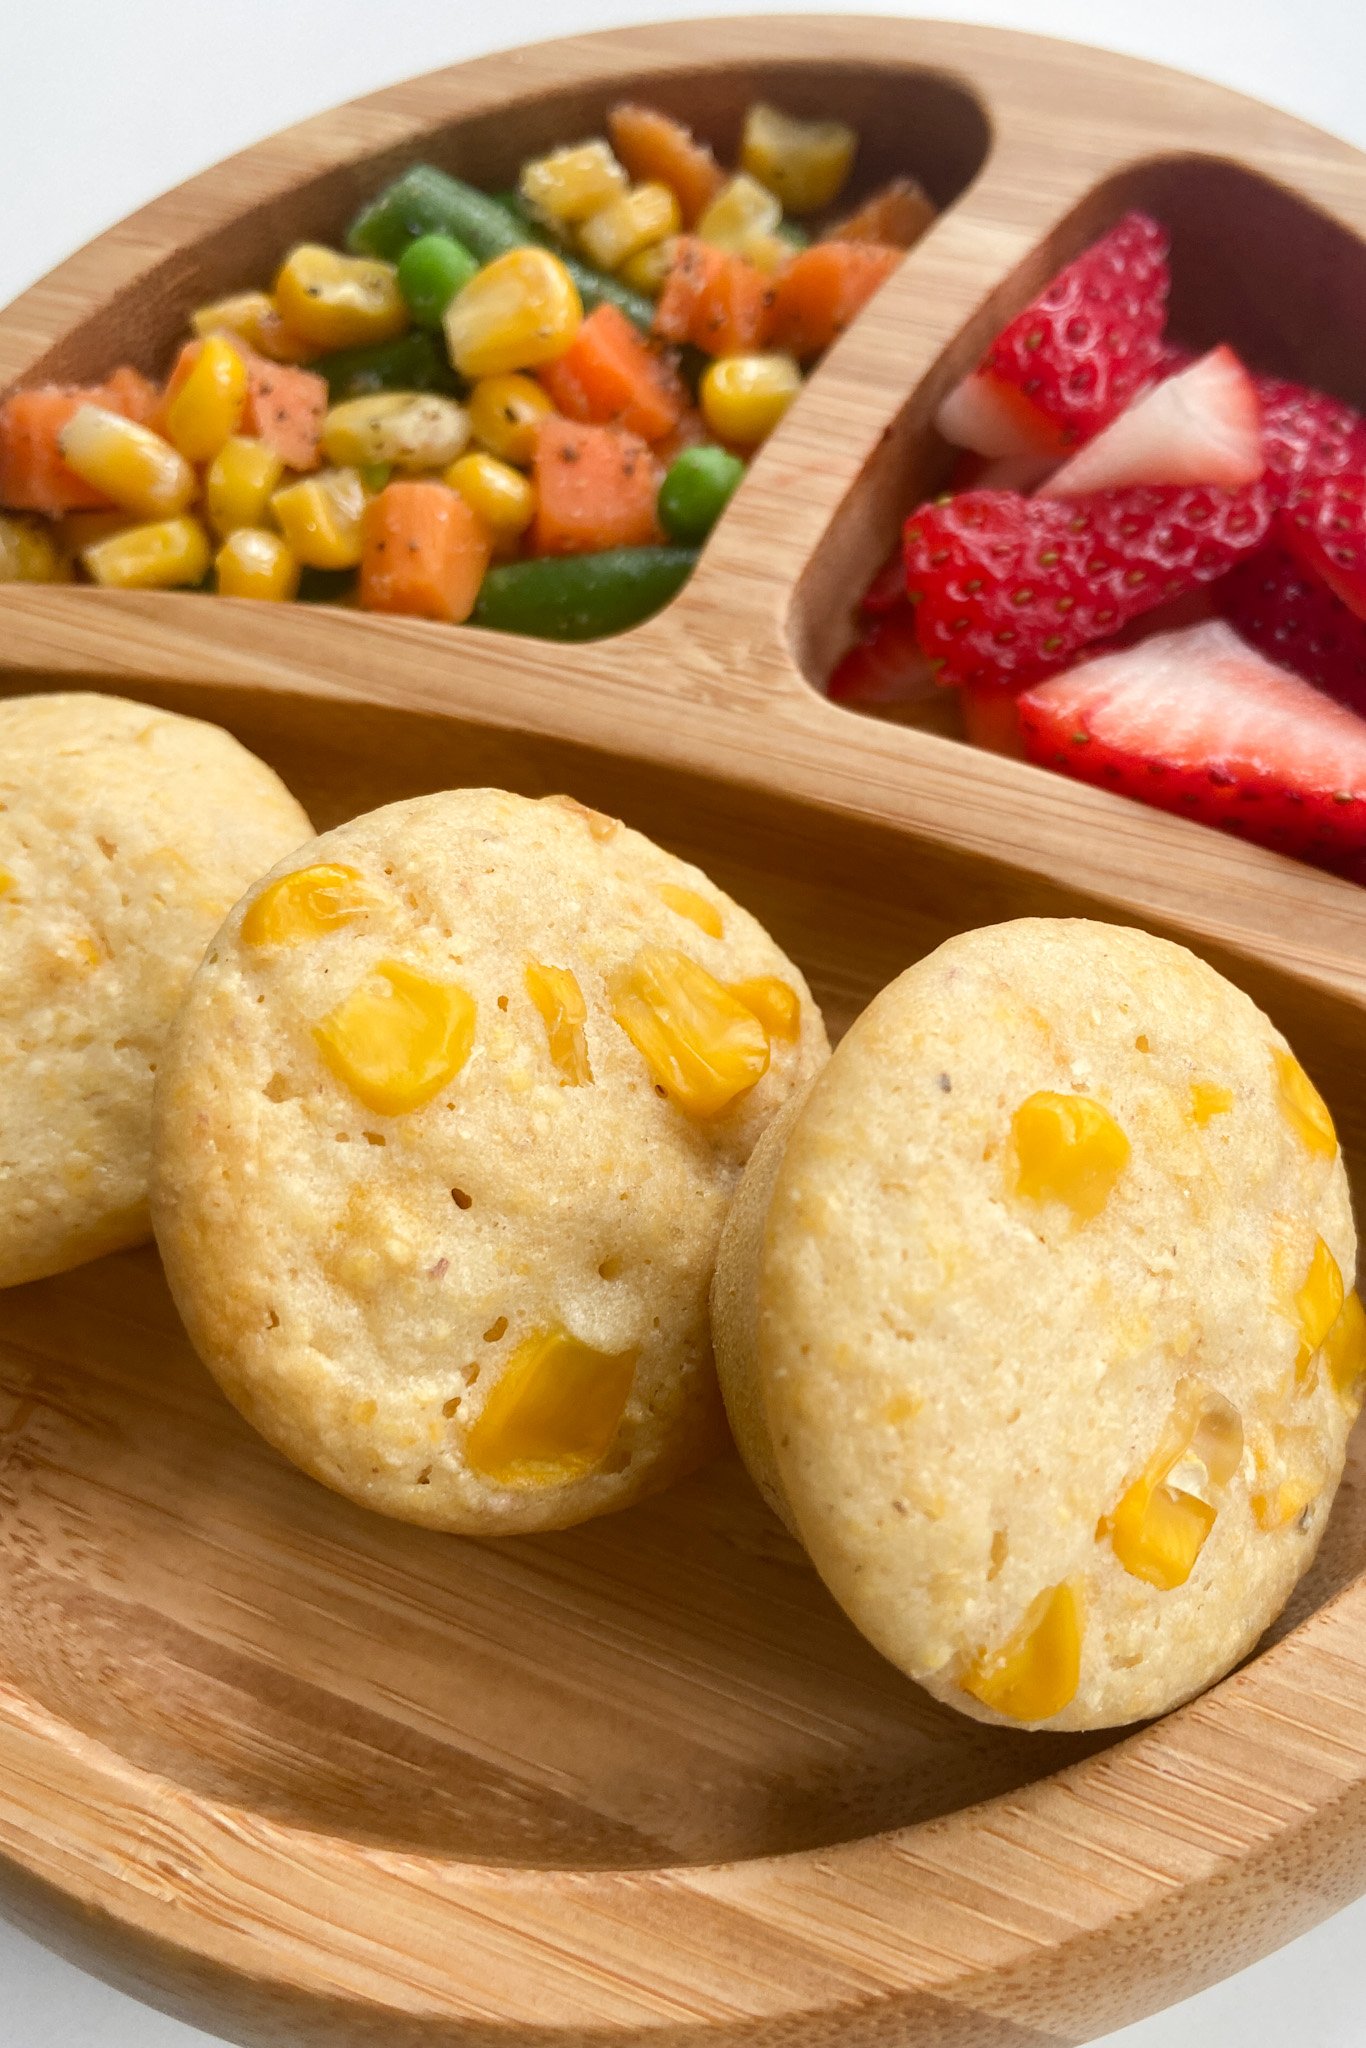 20 Toddler Lunch Ideas For Daycare - Feeding Tiny Bellies